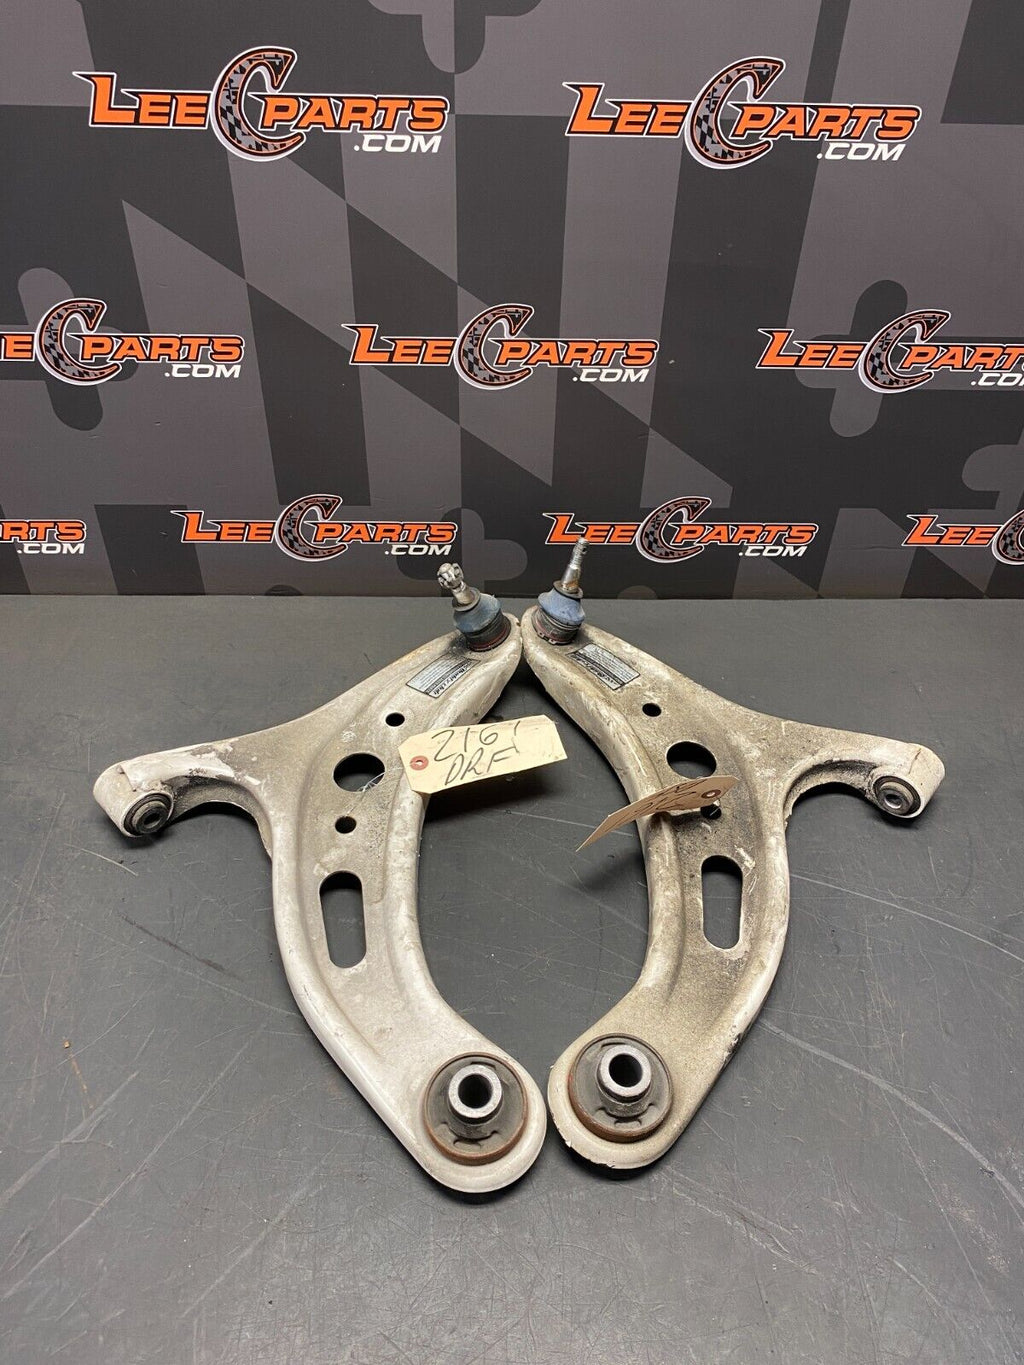 2017 SUBARU BRZ BUDDY CLUB FRONT LOWER CONTROL ARMS PAIR DR PS USED